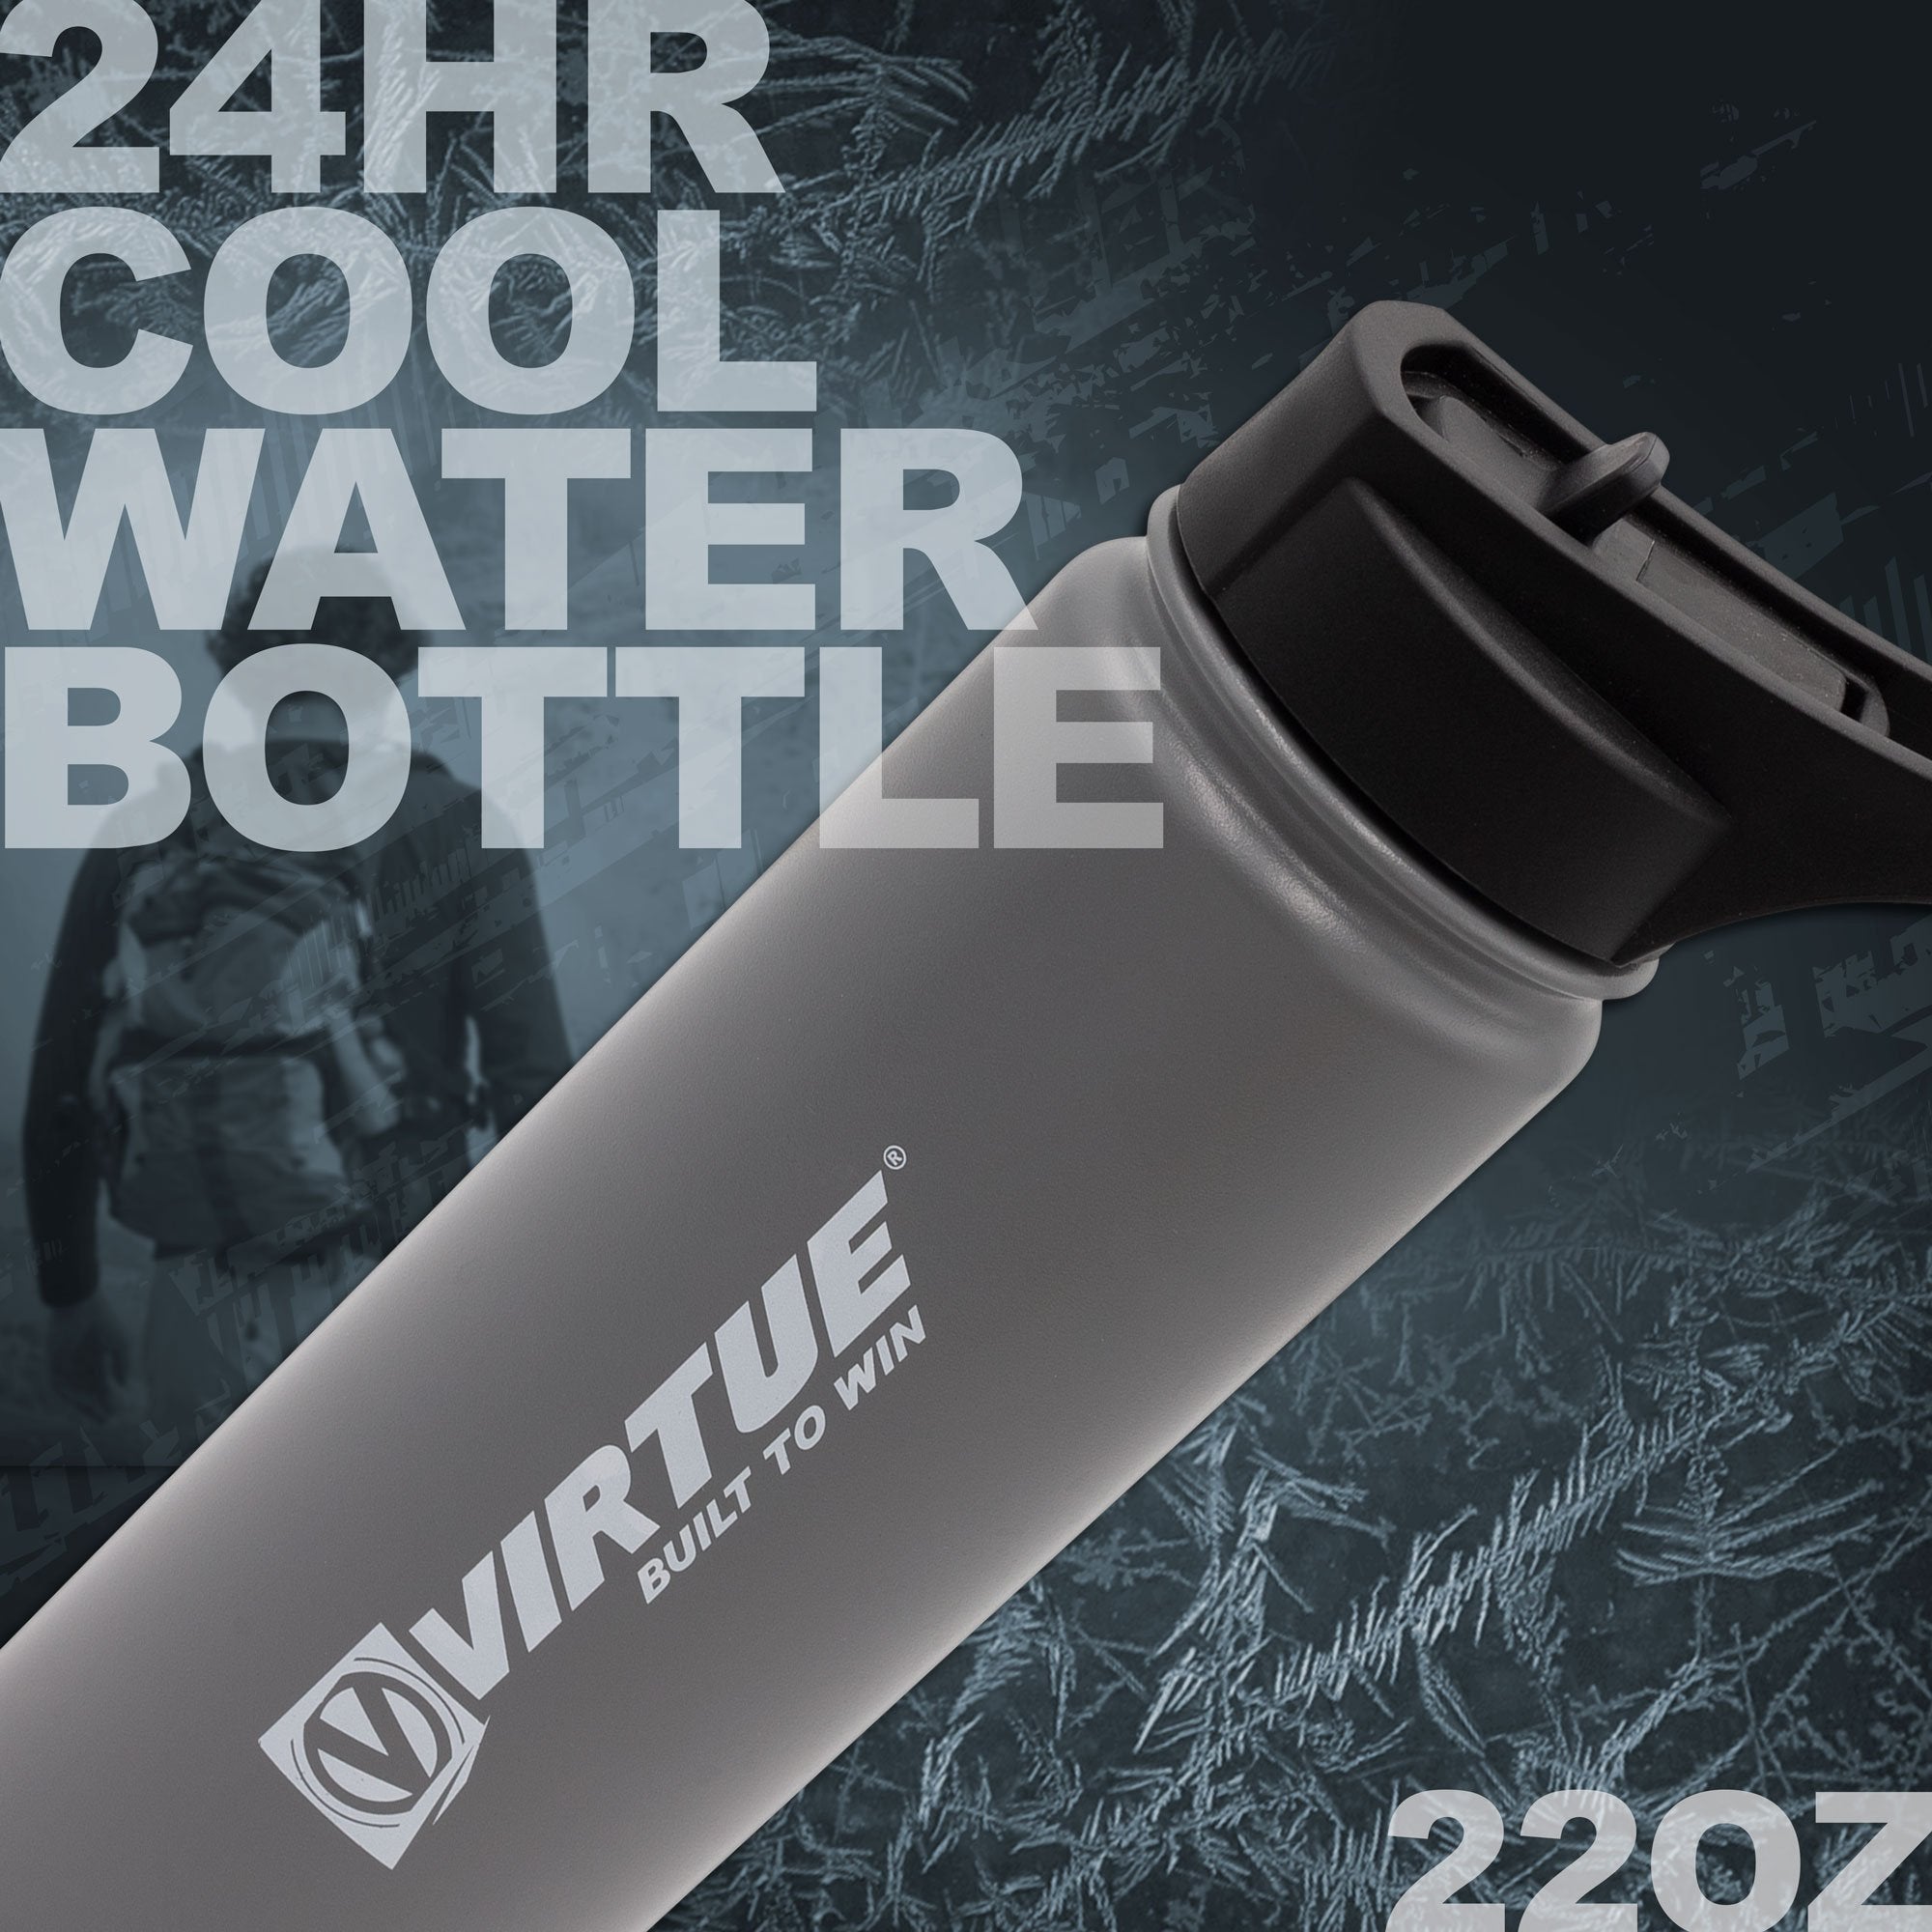 Virtue Stainless Steel 24Hr Cool Water Bottle - 22oz - Gray –